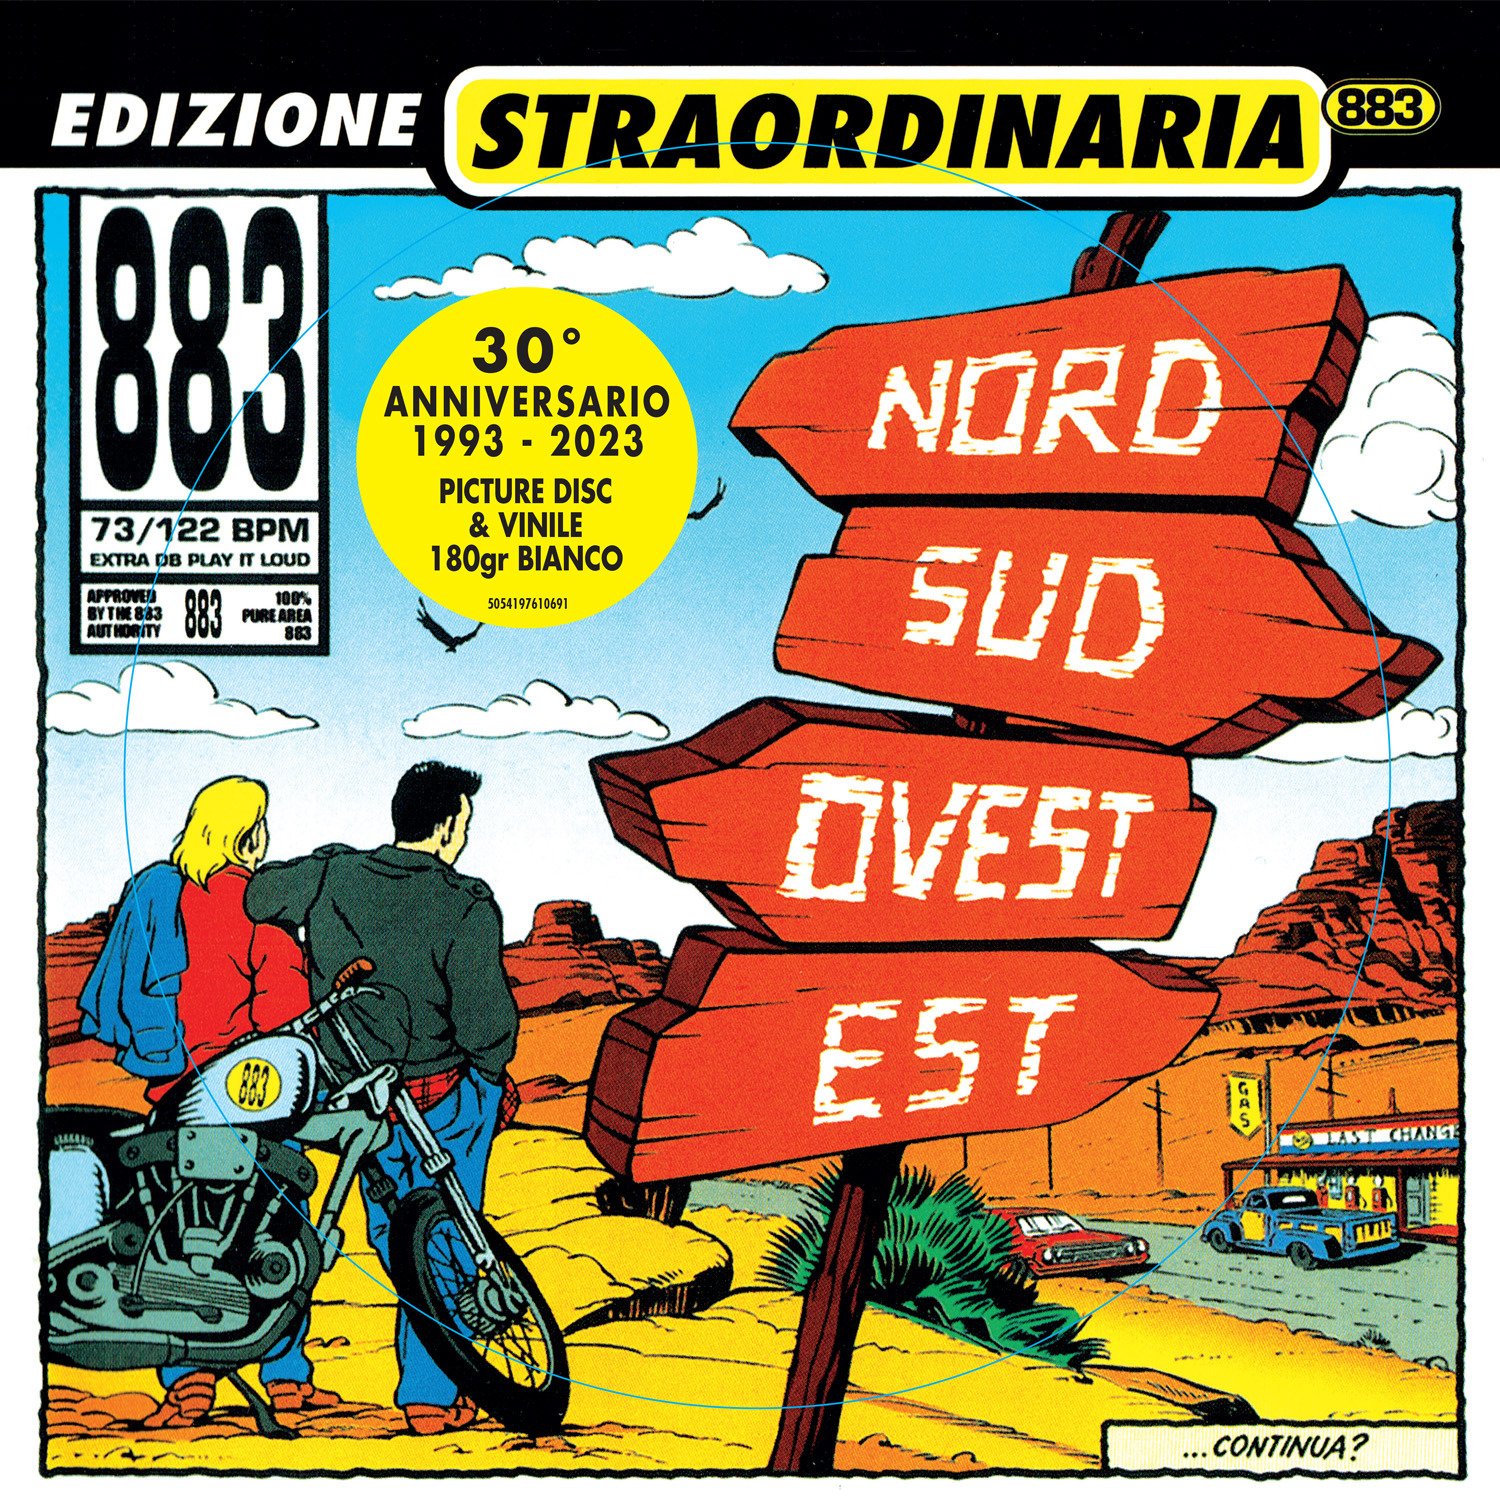 CD Shop - EIGHT EIGHT THREE NORD SUD OVEST EST